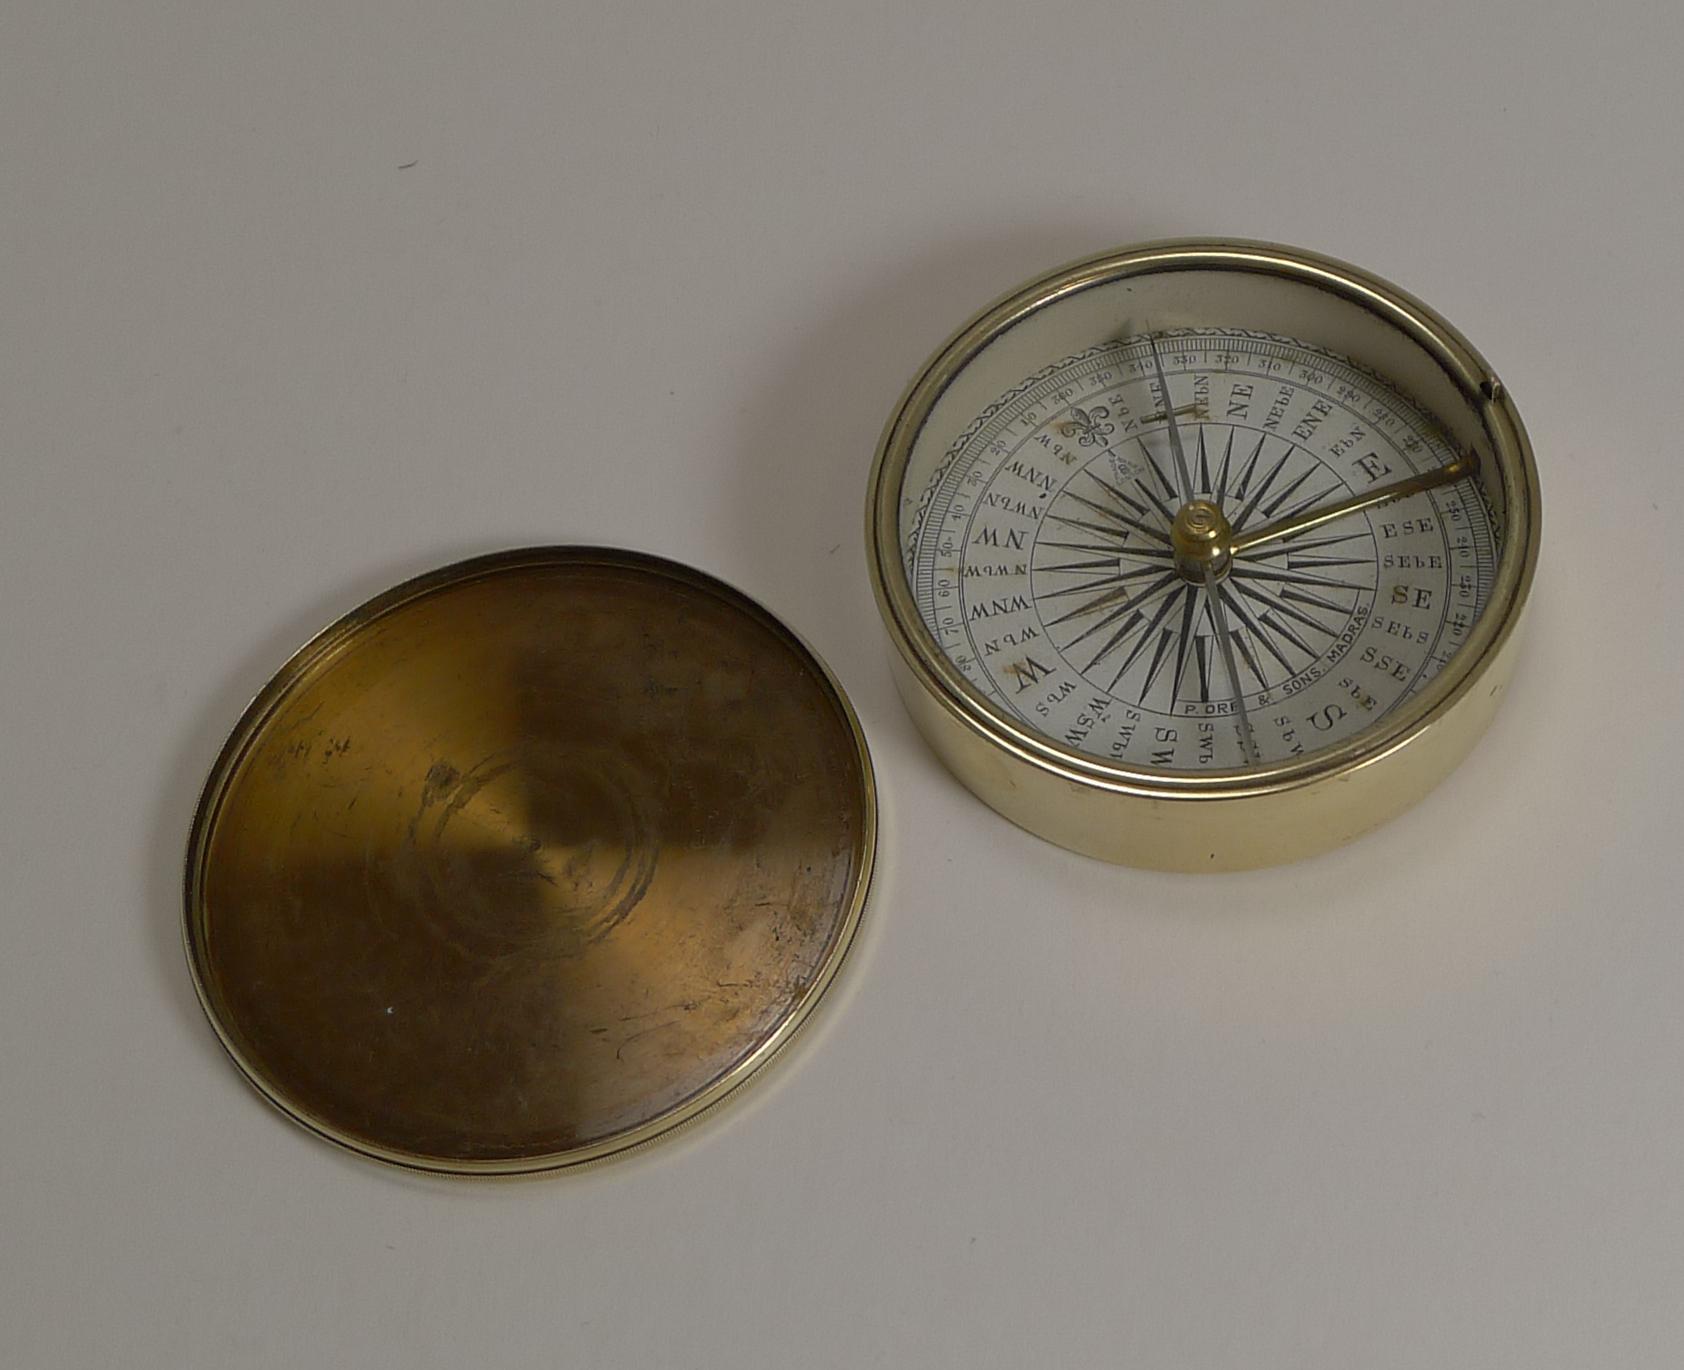 A handsome Victorian pocket / explorer compass with a cross bar needle pivoting on a jewelled bearing above a traditional dial.

Complete in it's brass case and lid and incorporates a transit lock activated when the lid is in place, the compass is